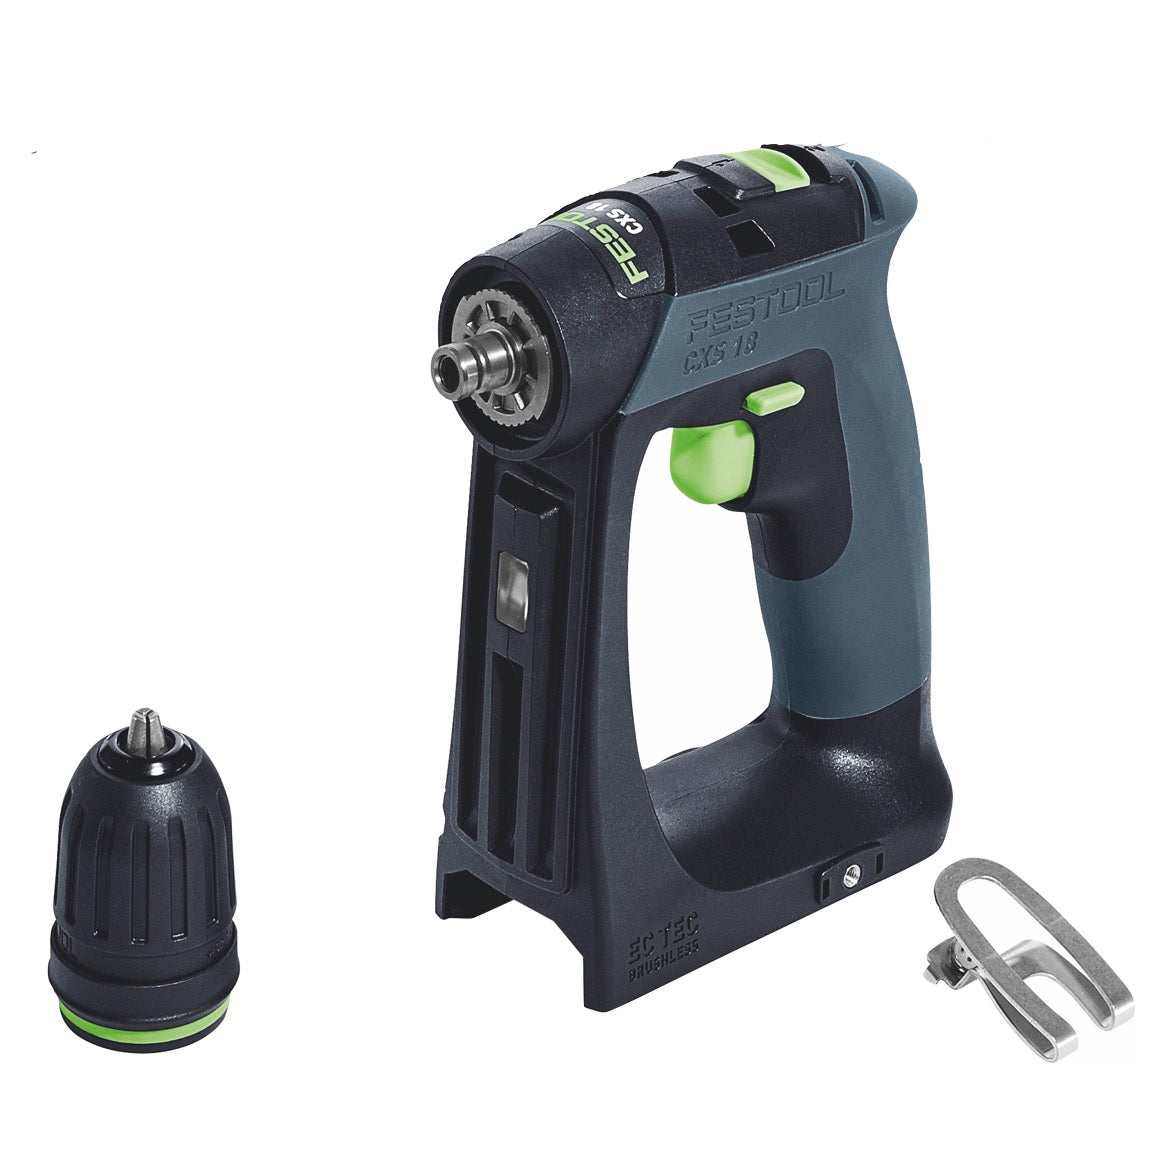 Festool CXS 18-Basic Akku Bohrschrauber 18 V 40 Nm Brushless ( 576882 ) + Systainer (inkl. Systainer ToolBox SYS3 TB M 137)